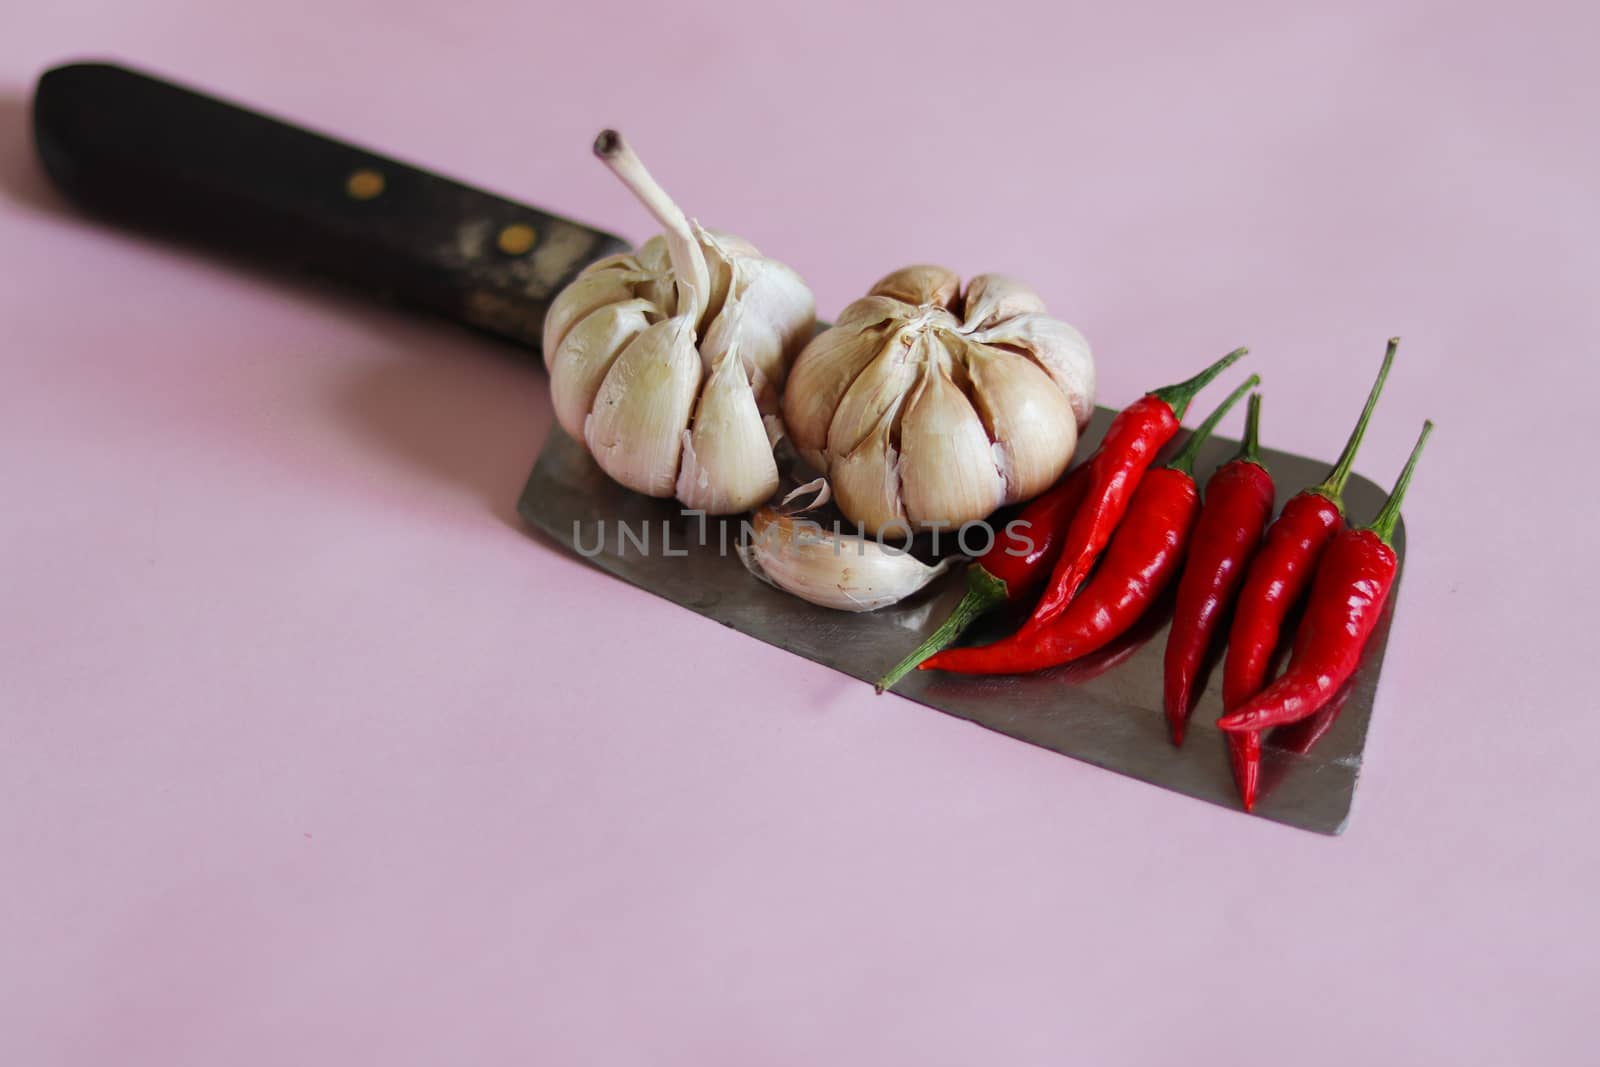 Garlic bulbs and red chilies on a knife against a pink background to show concept of gastronomy, cuisine, cooking and food industry